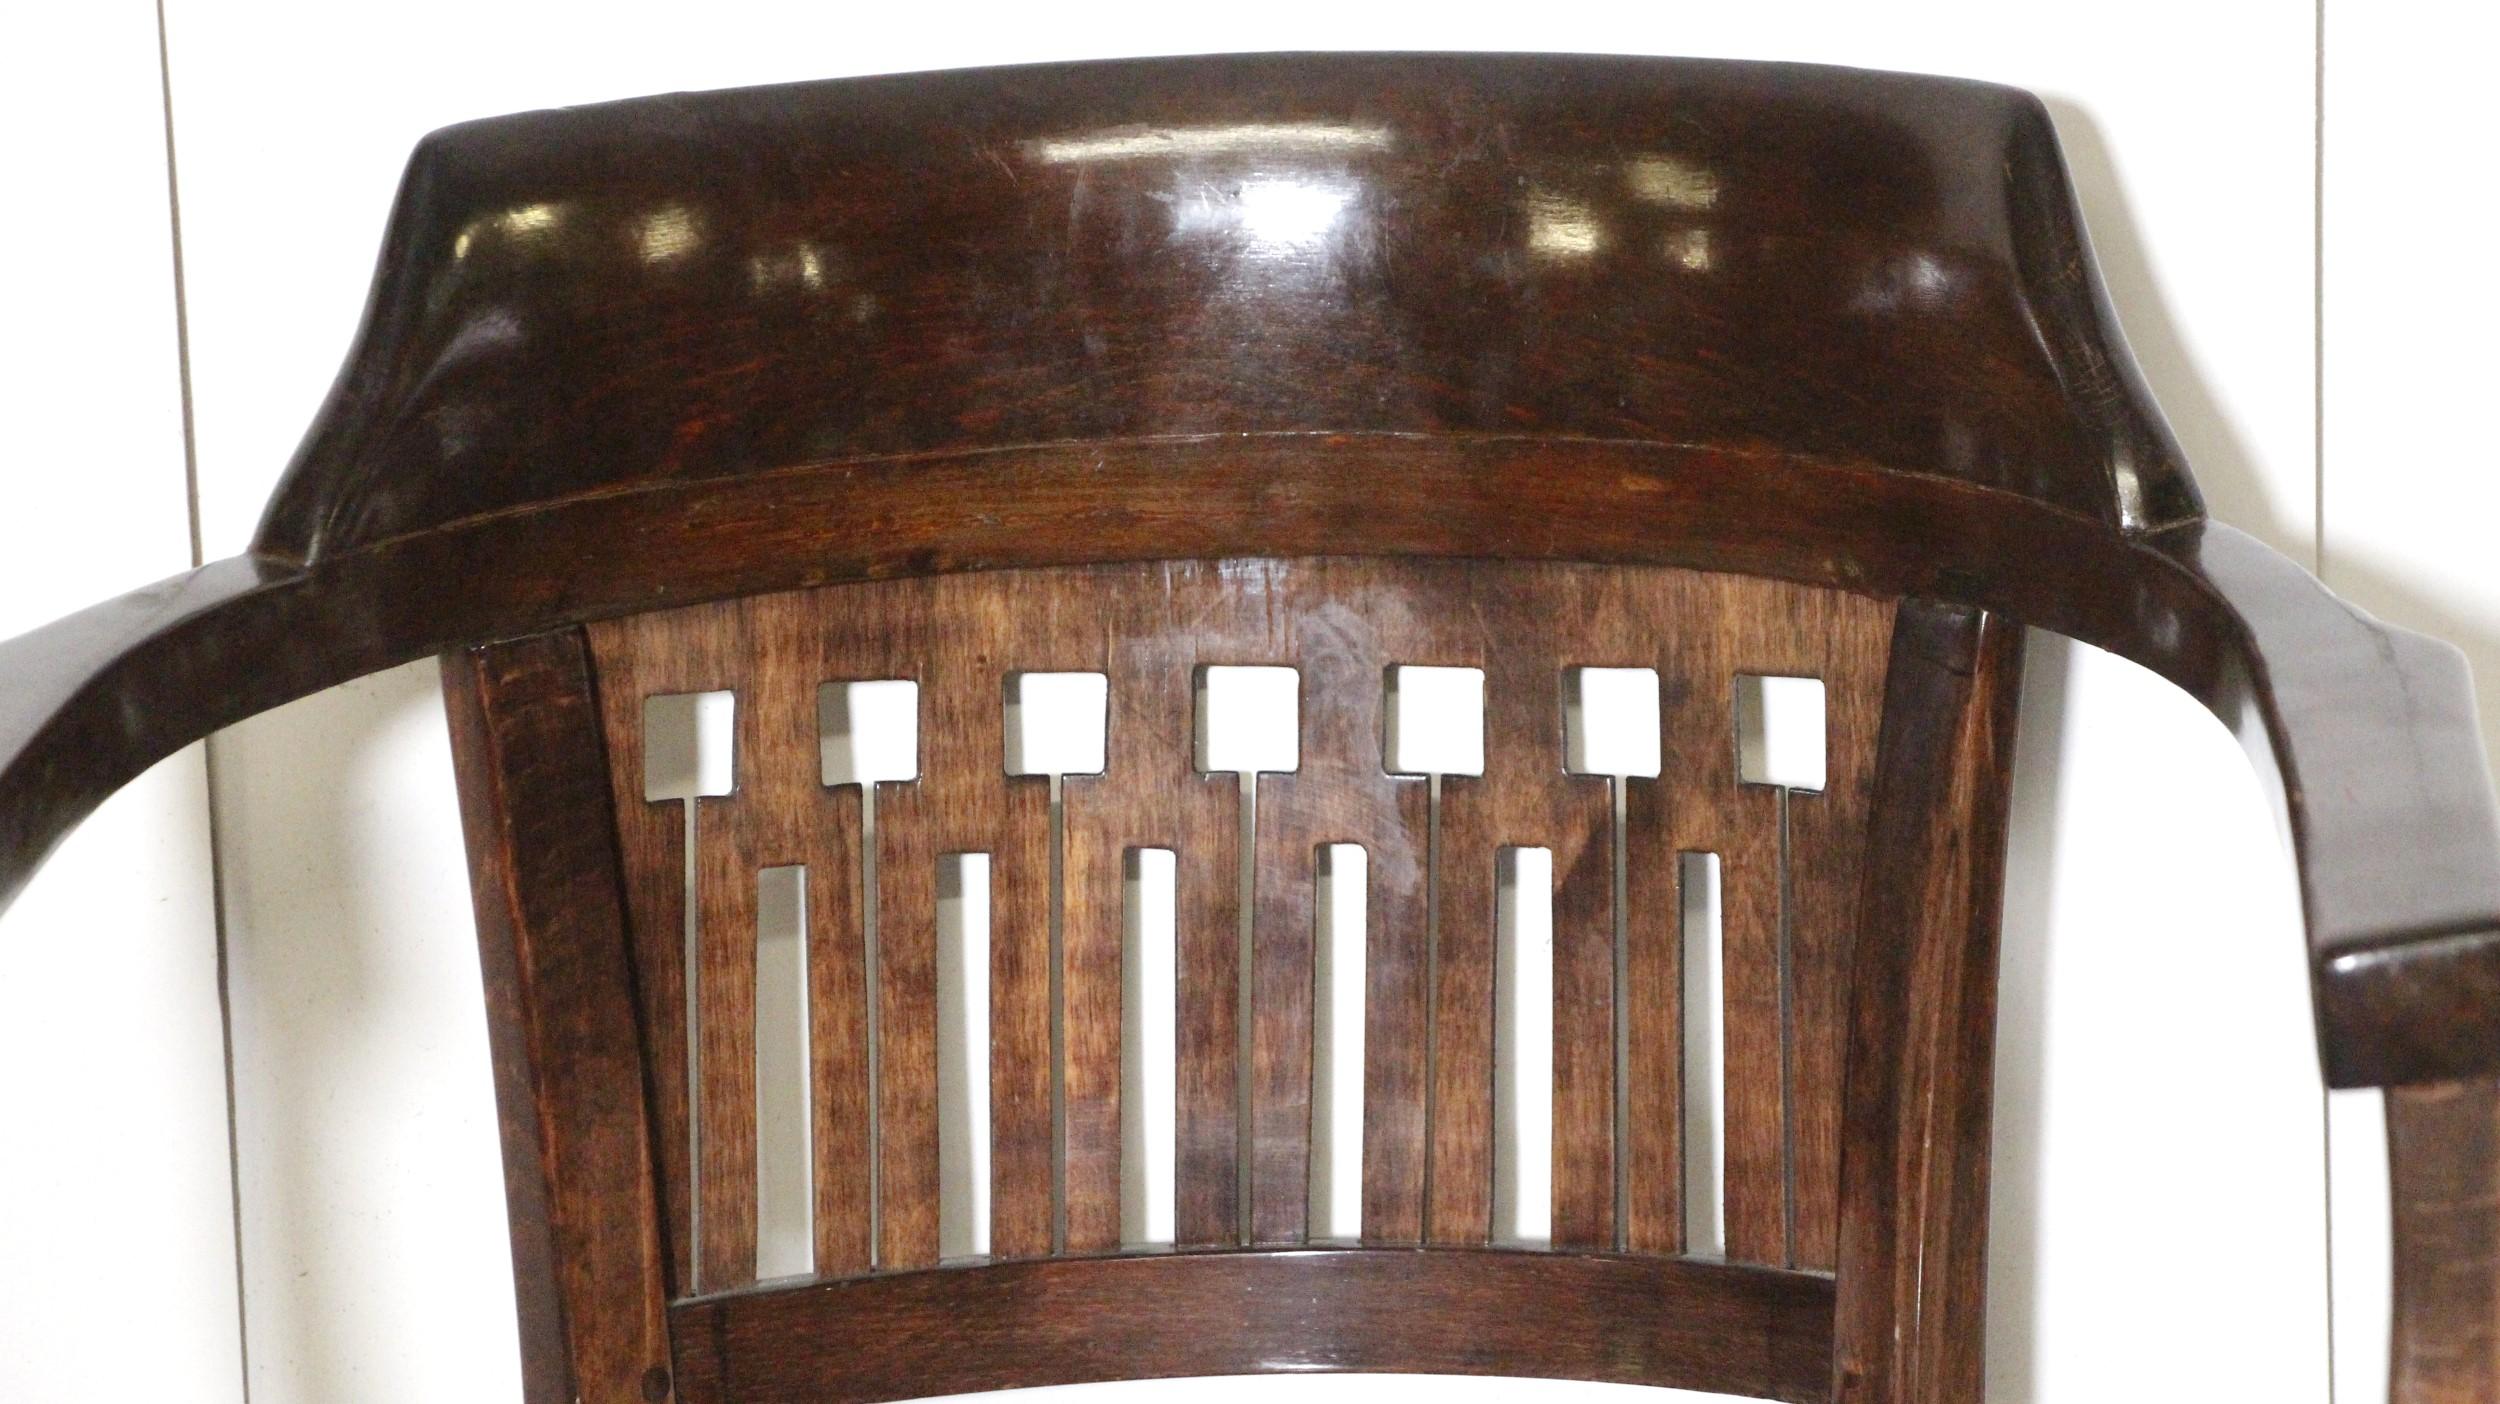 Austrian J. J. Kohn Secessionist Bentwood Armchair Designed by Otto Wagner Early 1900s